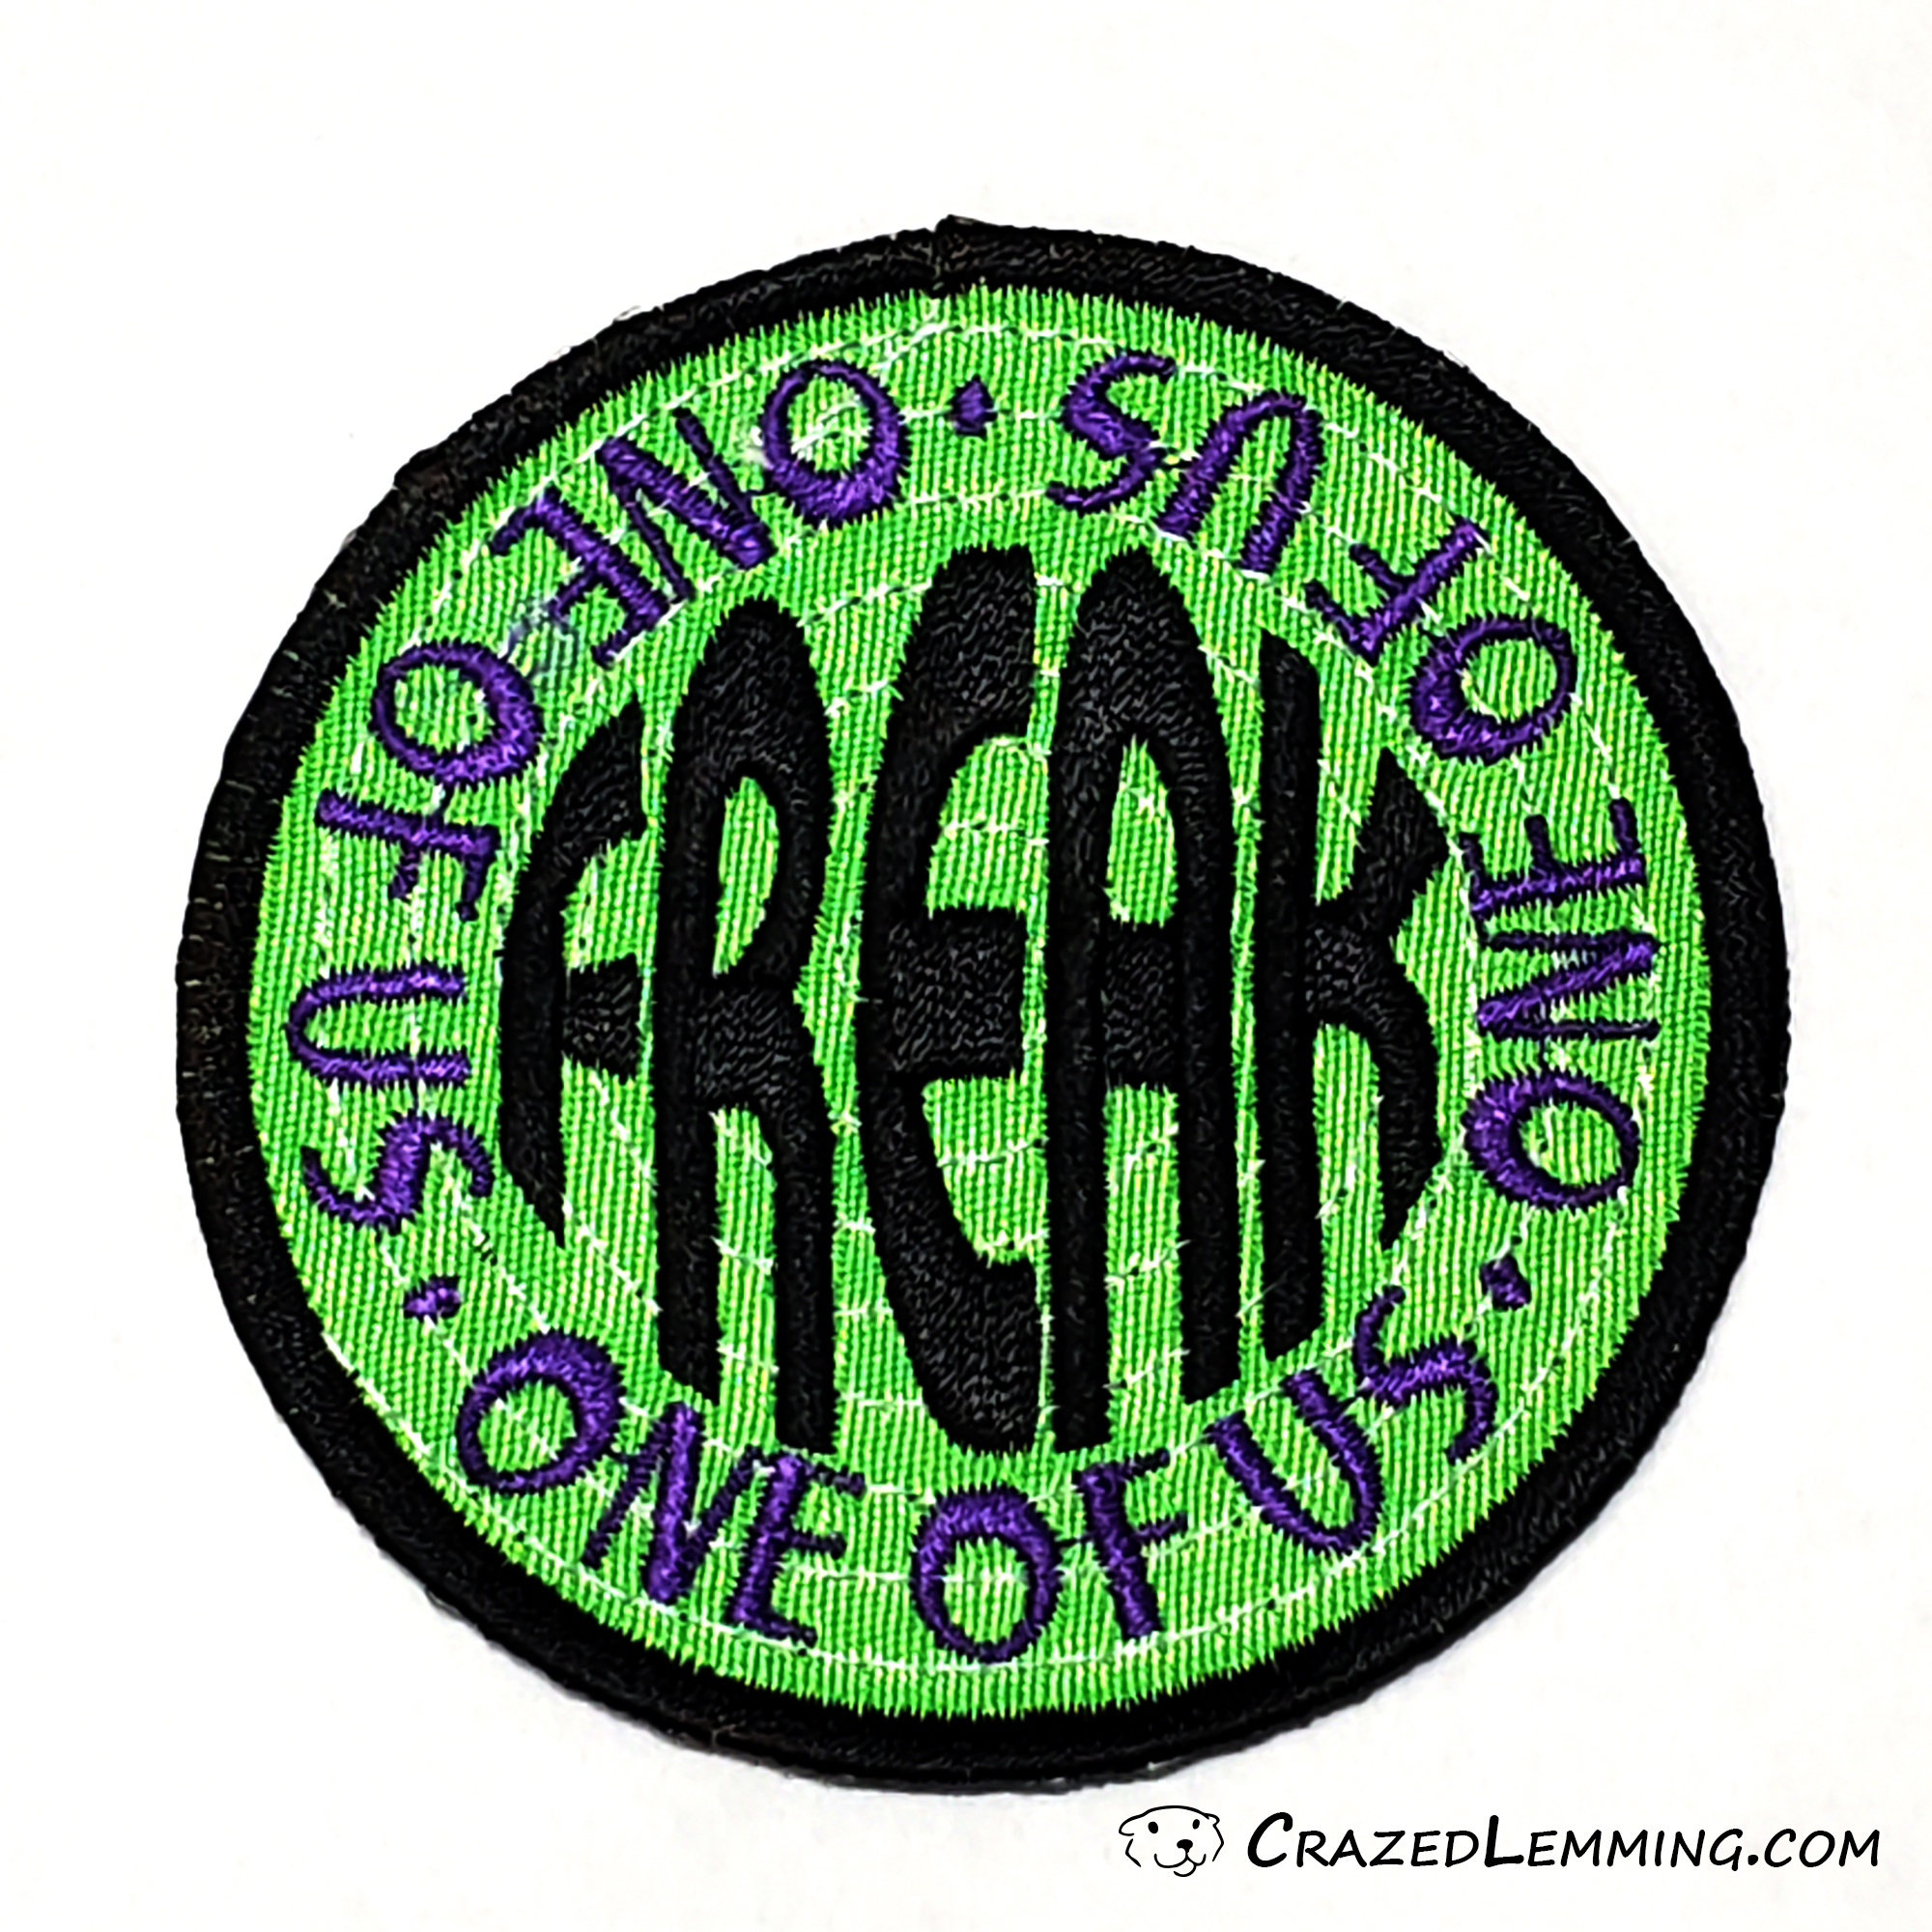 PATCHES - HIGH QUALITY LARGE IRON-ON - $10 – Amigos & Us